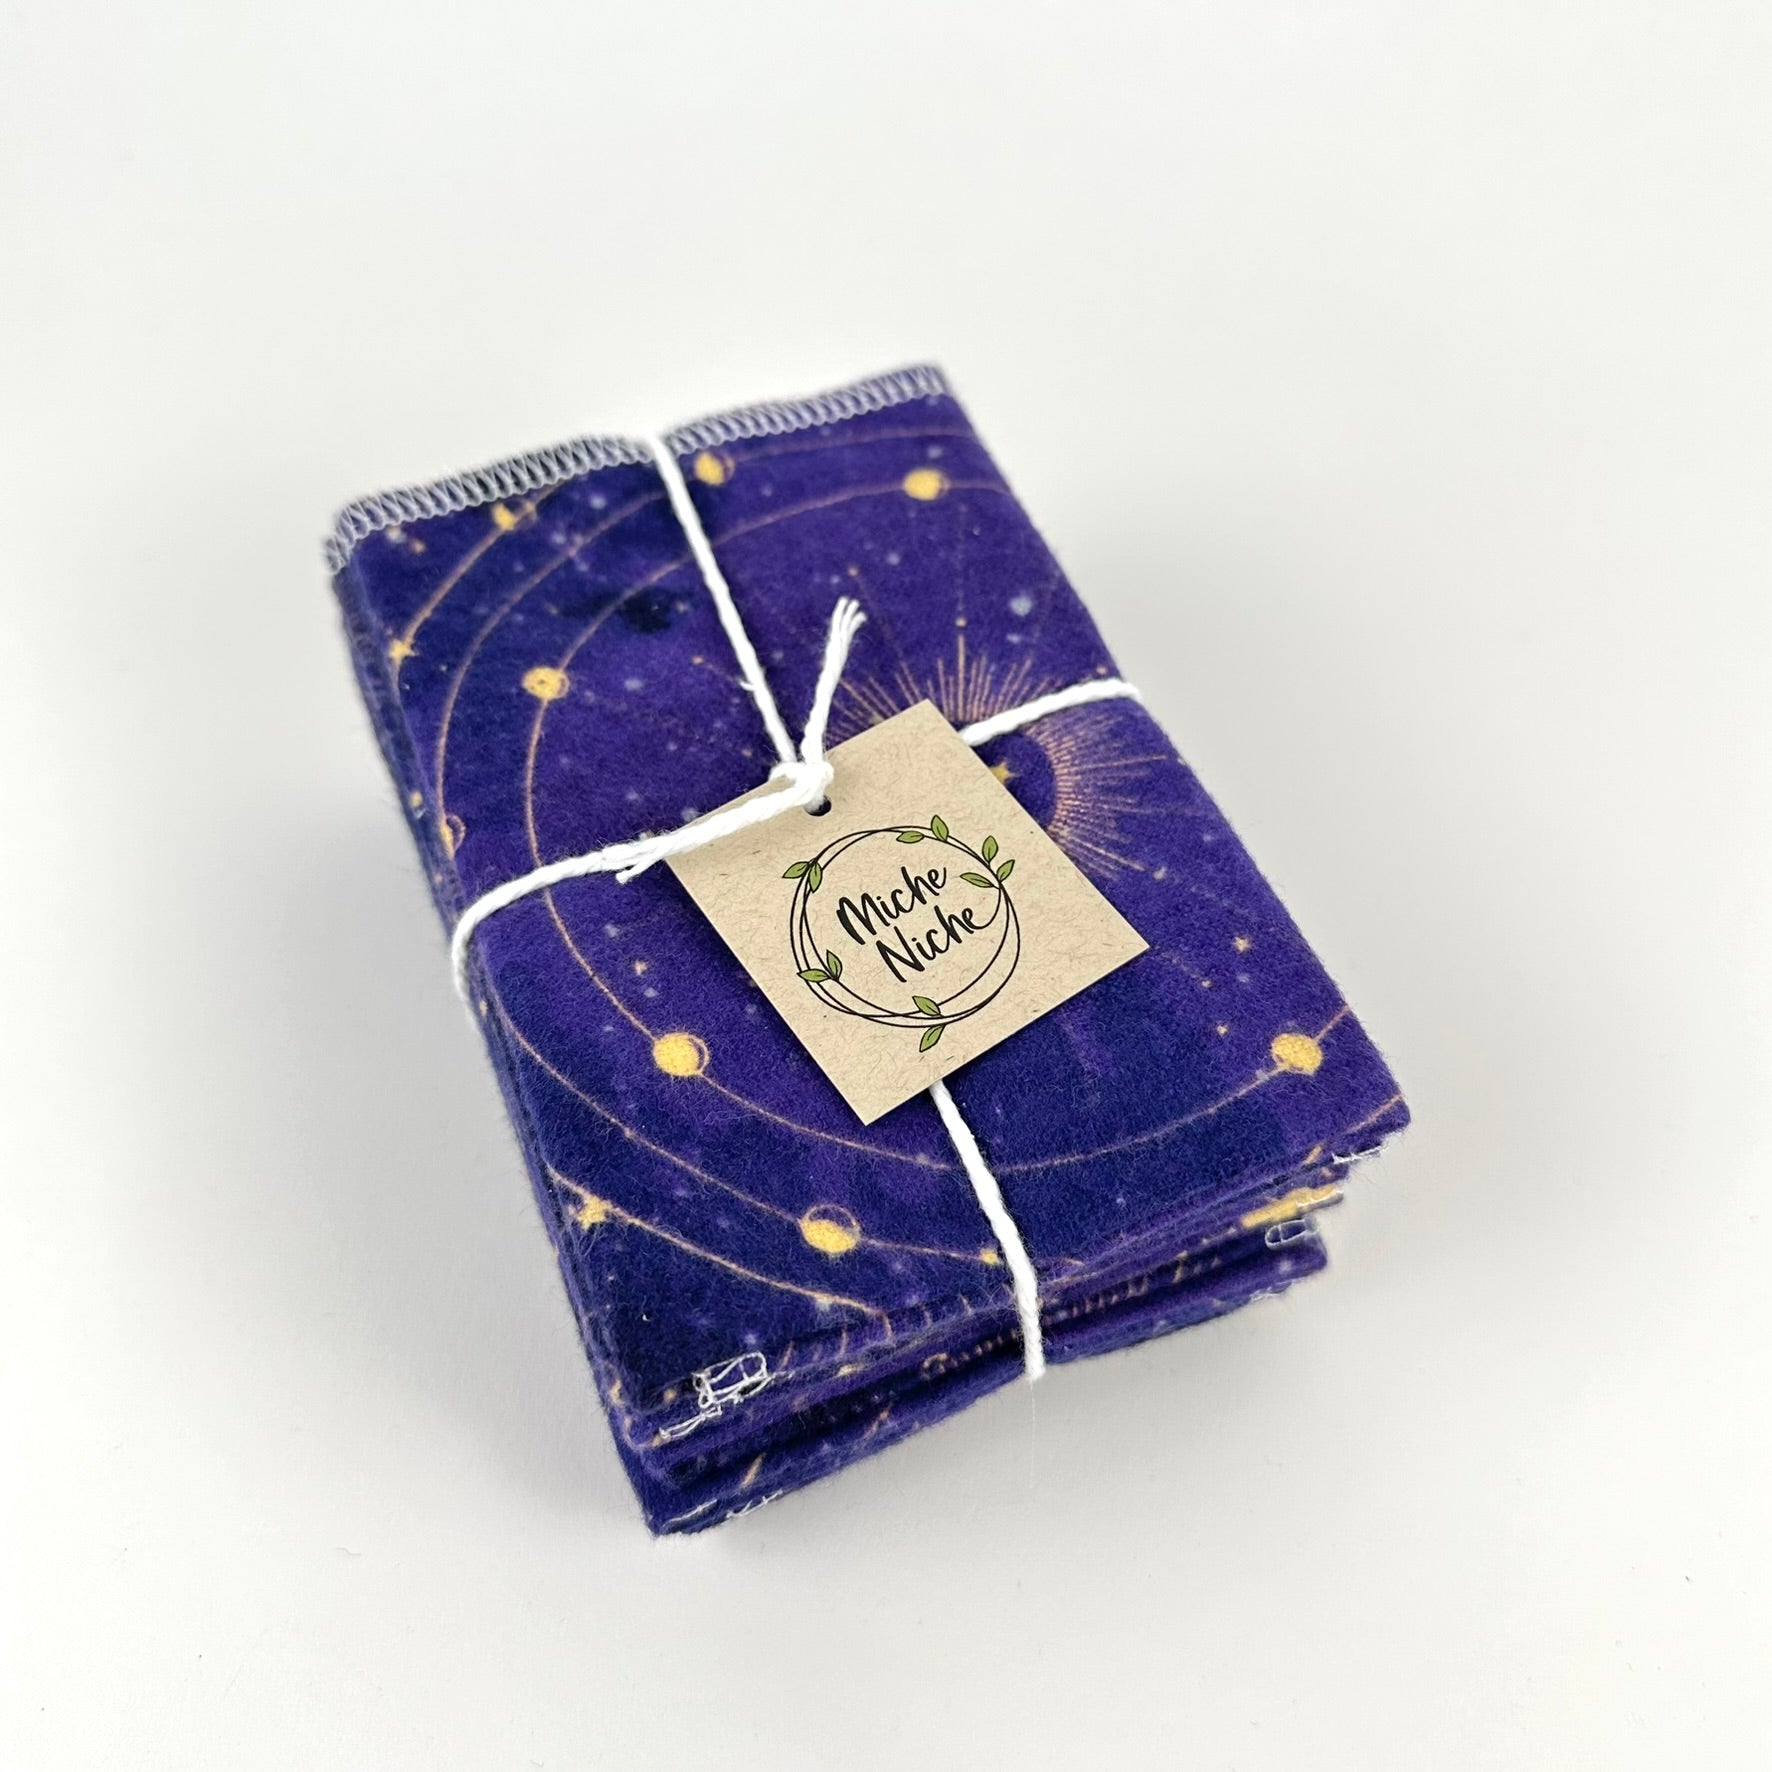 A pack of Miche Niche flannel napkins in a pattern of yellow astrological symbols and stars on a dark blue background